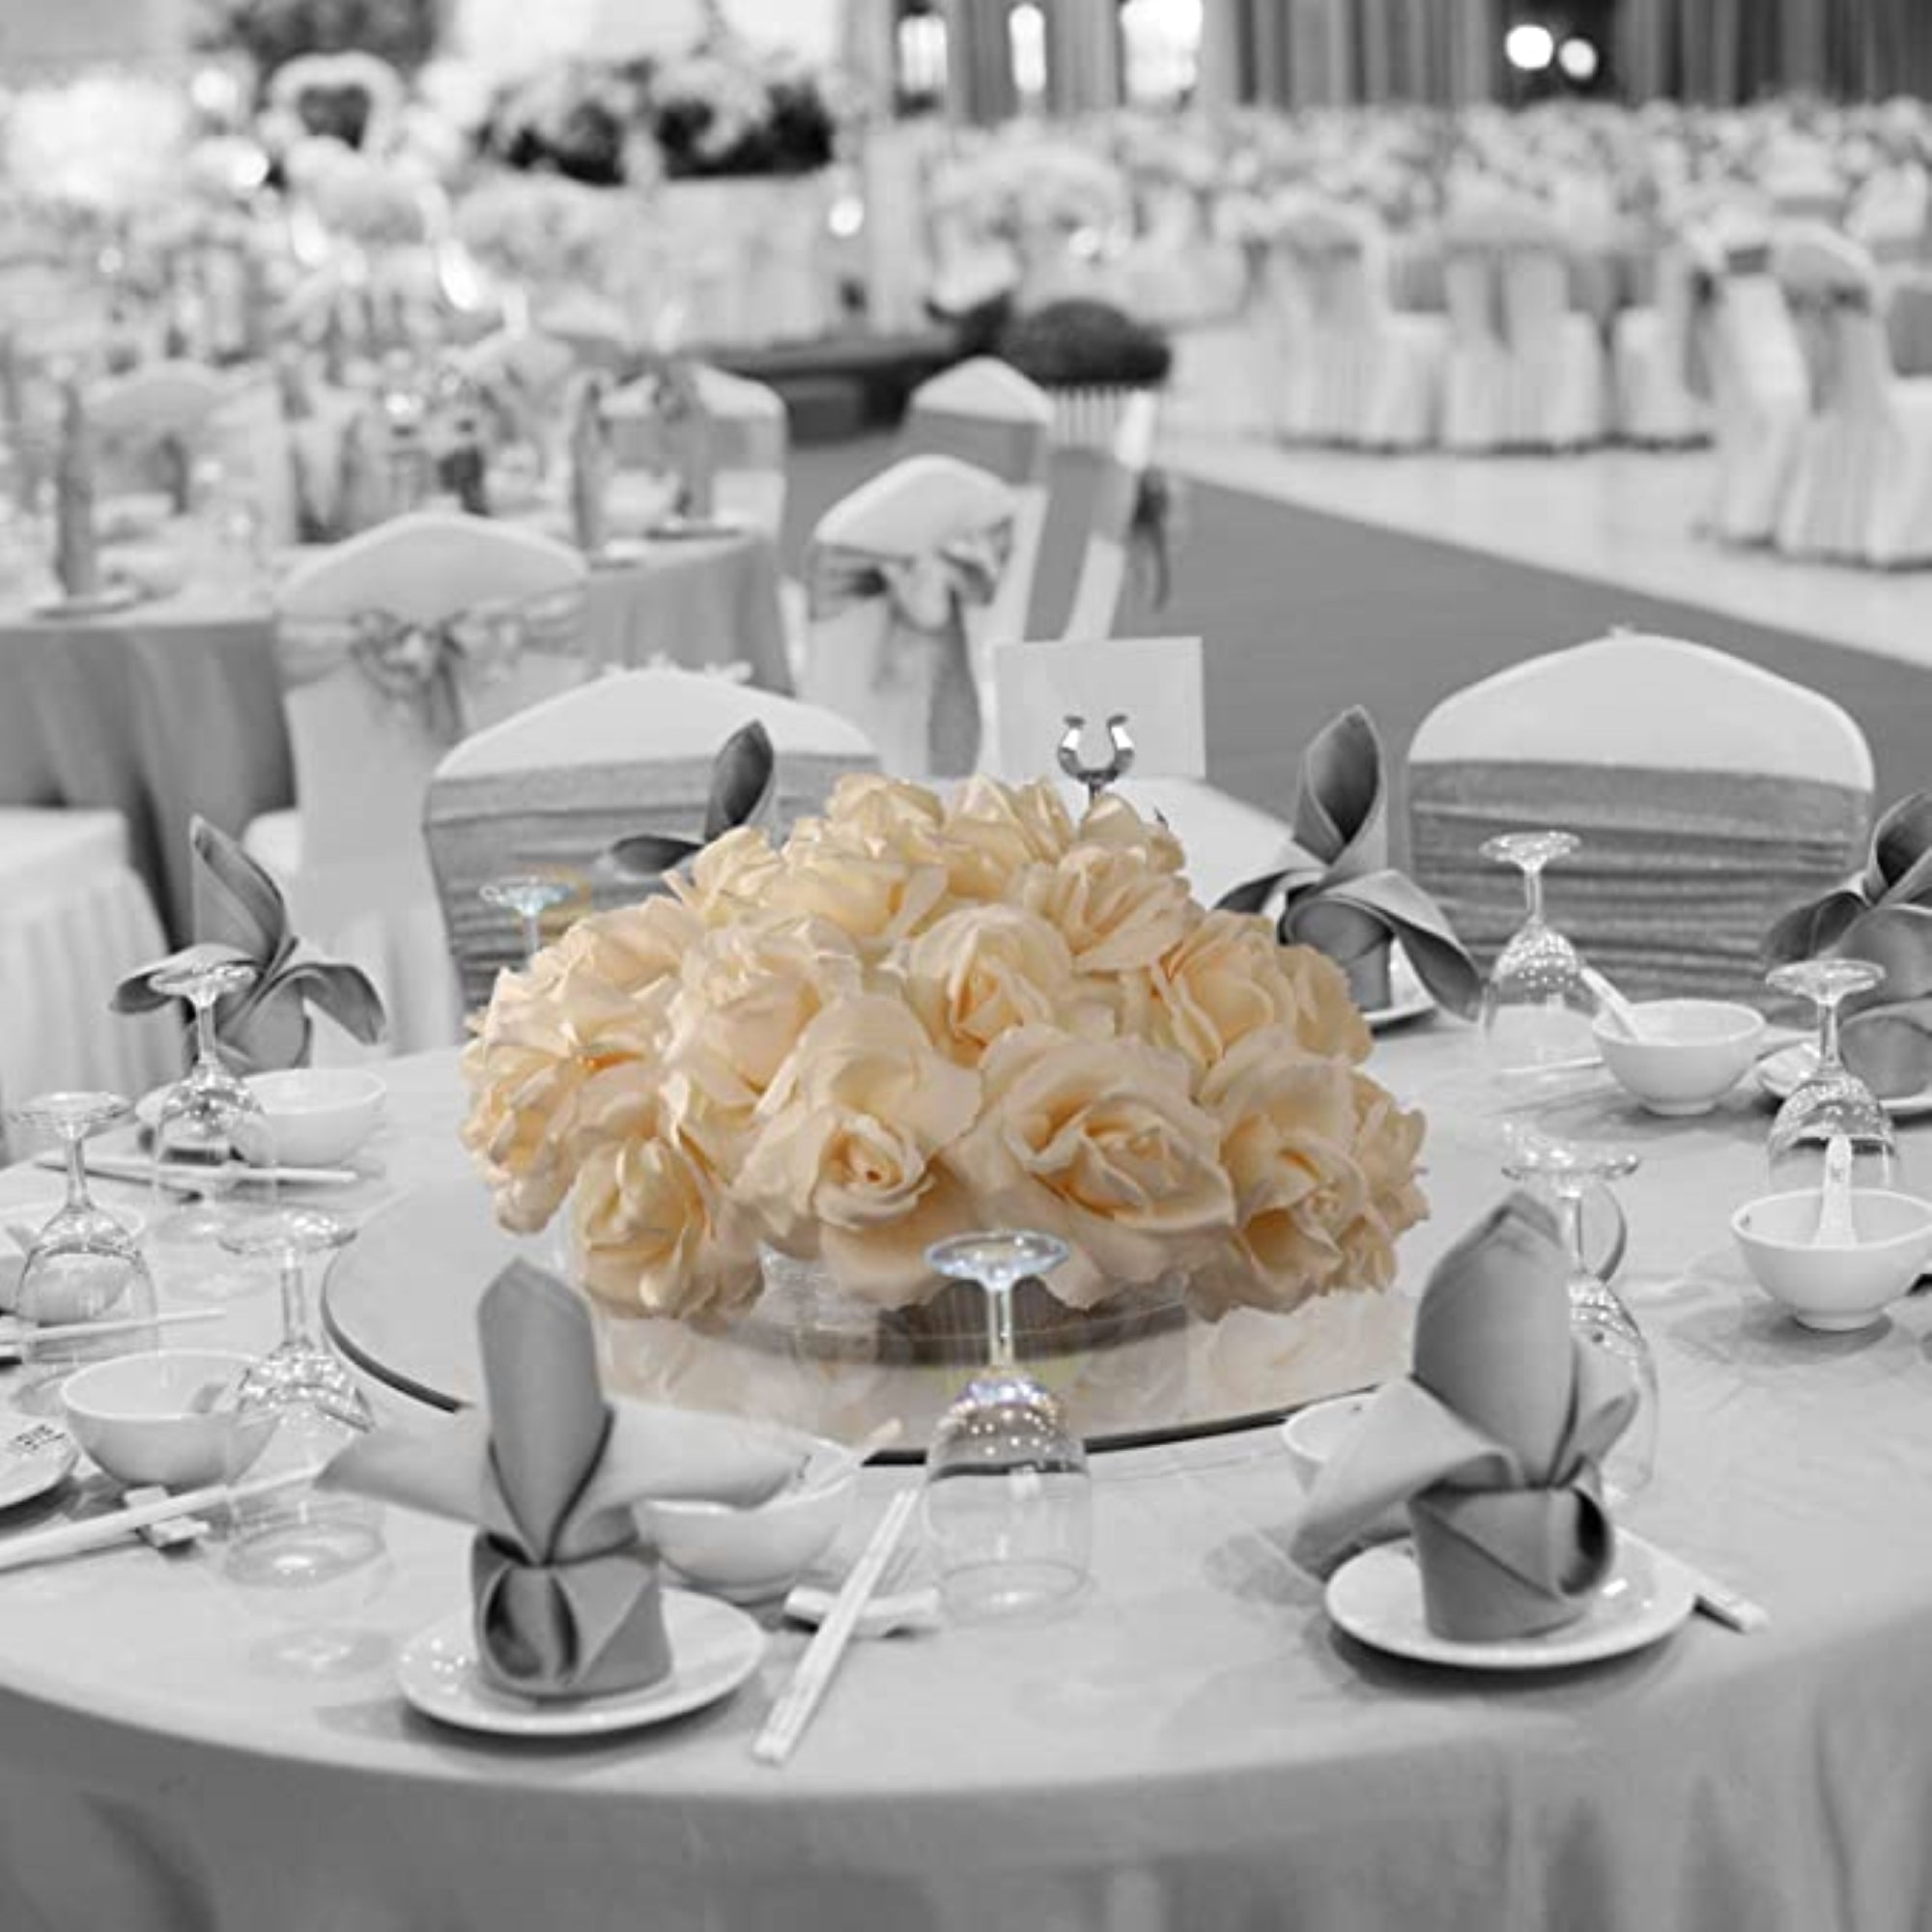 Timeless Elegance: 100pc Silk Flowers Ivory Rose Picks - Stunning Faux Roses for Endless Floral Arrangements and Weddings, Lifelike and Luxurious Decorative Pieces